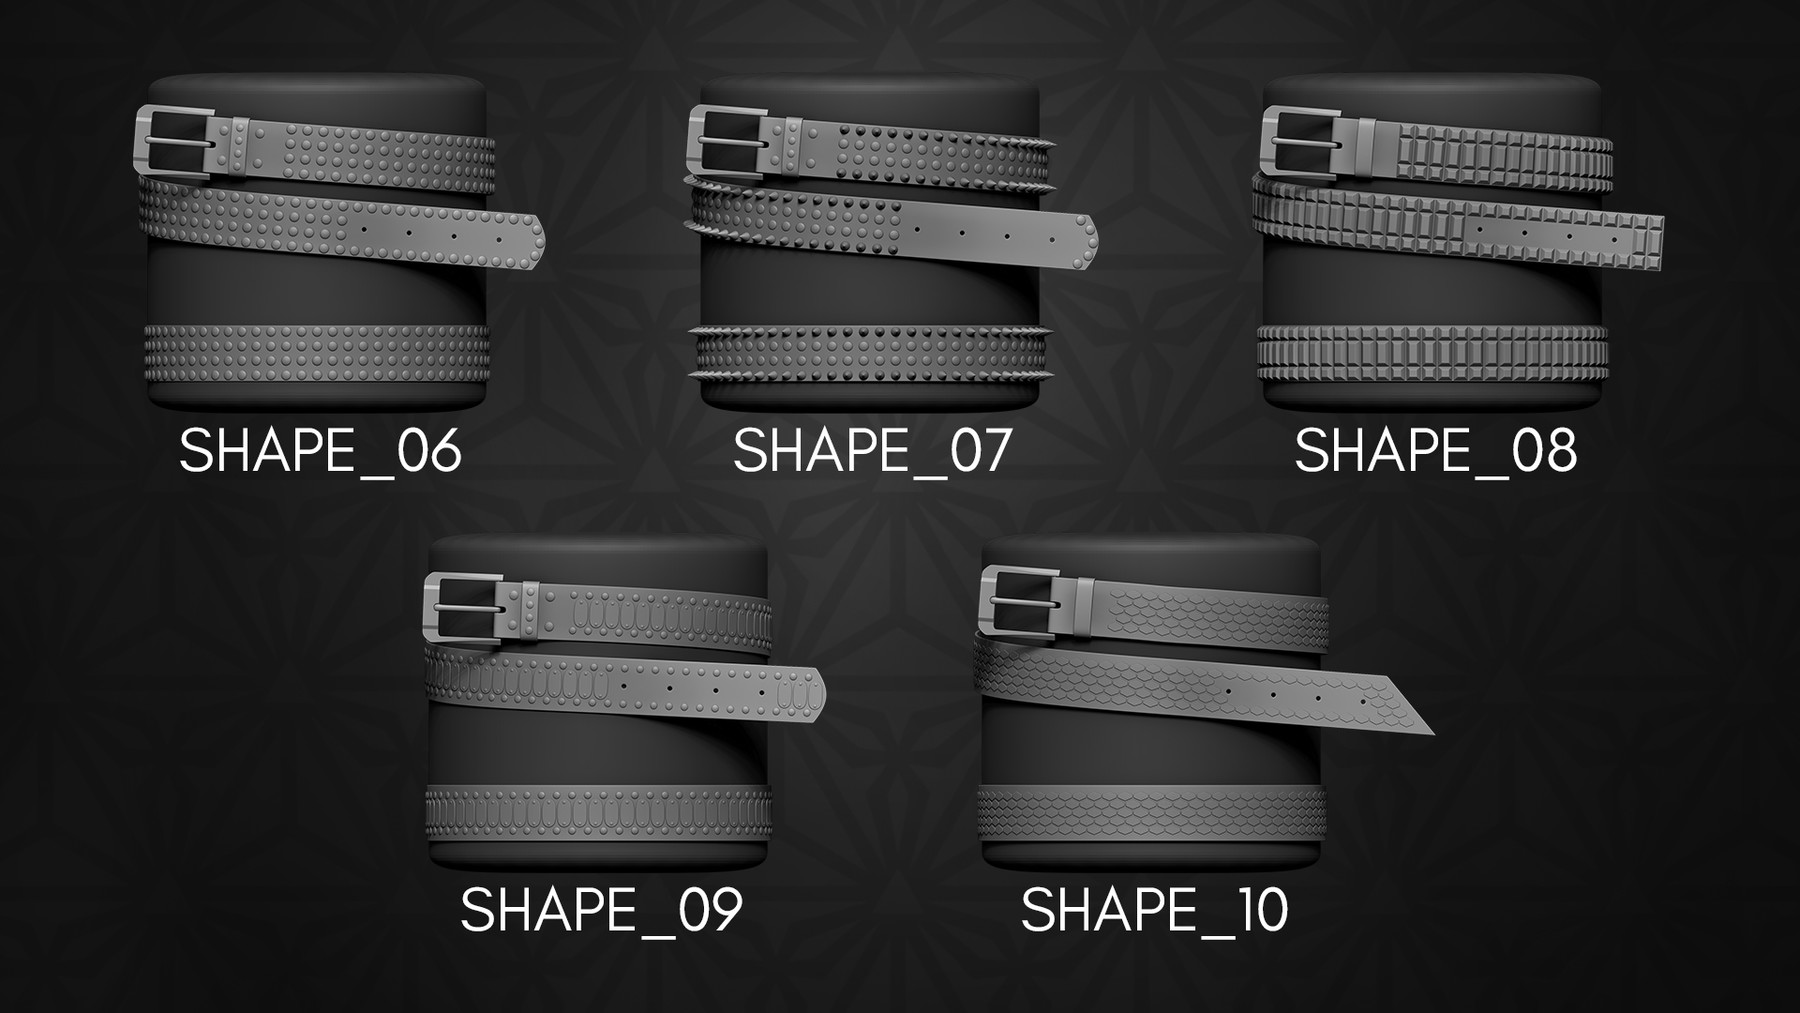 belts in zbrush